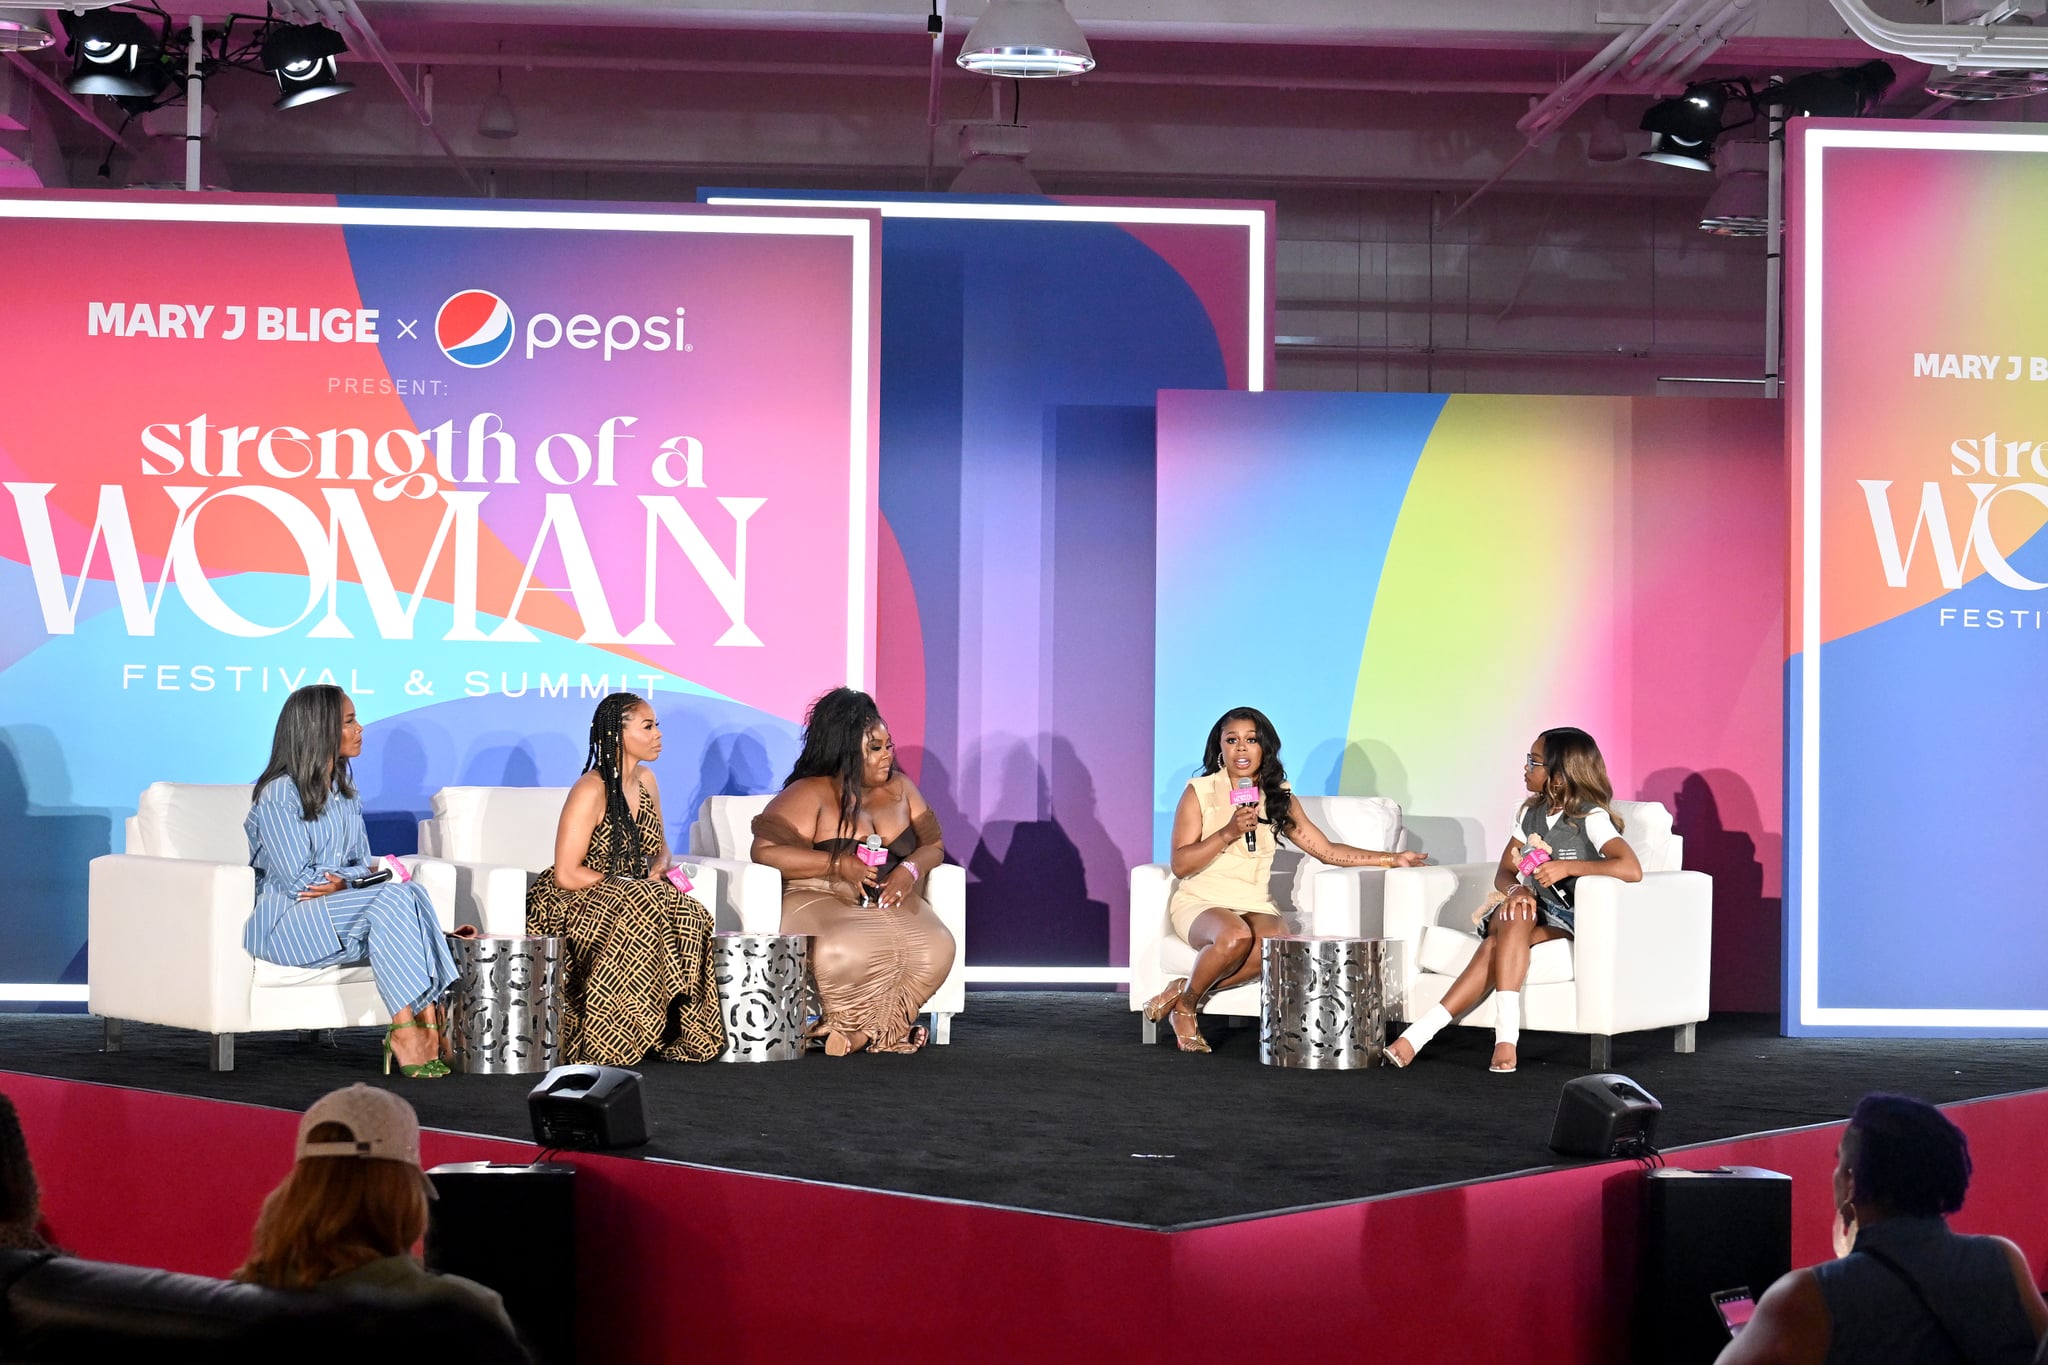 ATLANTA, Georgia - MAY 13: (LR) Mara Brock Akil, Brandi Evans, Raven Goodwin, Gail Bean and Marsai Martin at AmericaSmart Mary J.  Blige speaks onstage during the Power of a Women Summit, in partnership with Pepsi and Live Nation Urban.  Atlanta on May 13, 2023 in Atlanta, Georgia.  (Photo by Paras Griffin/Getty Images for Strength of a Woman Festival and Summit)